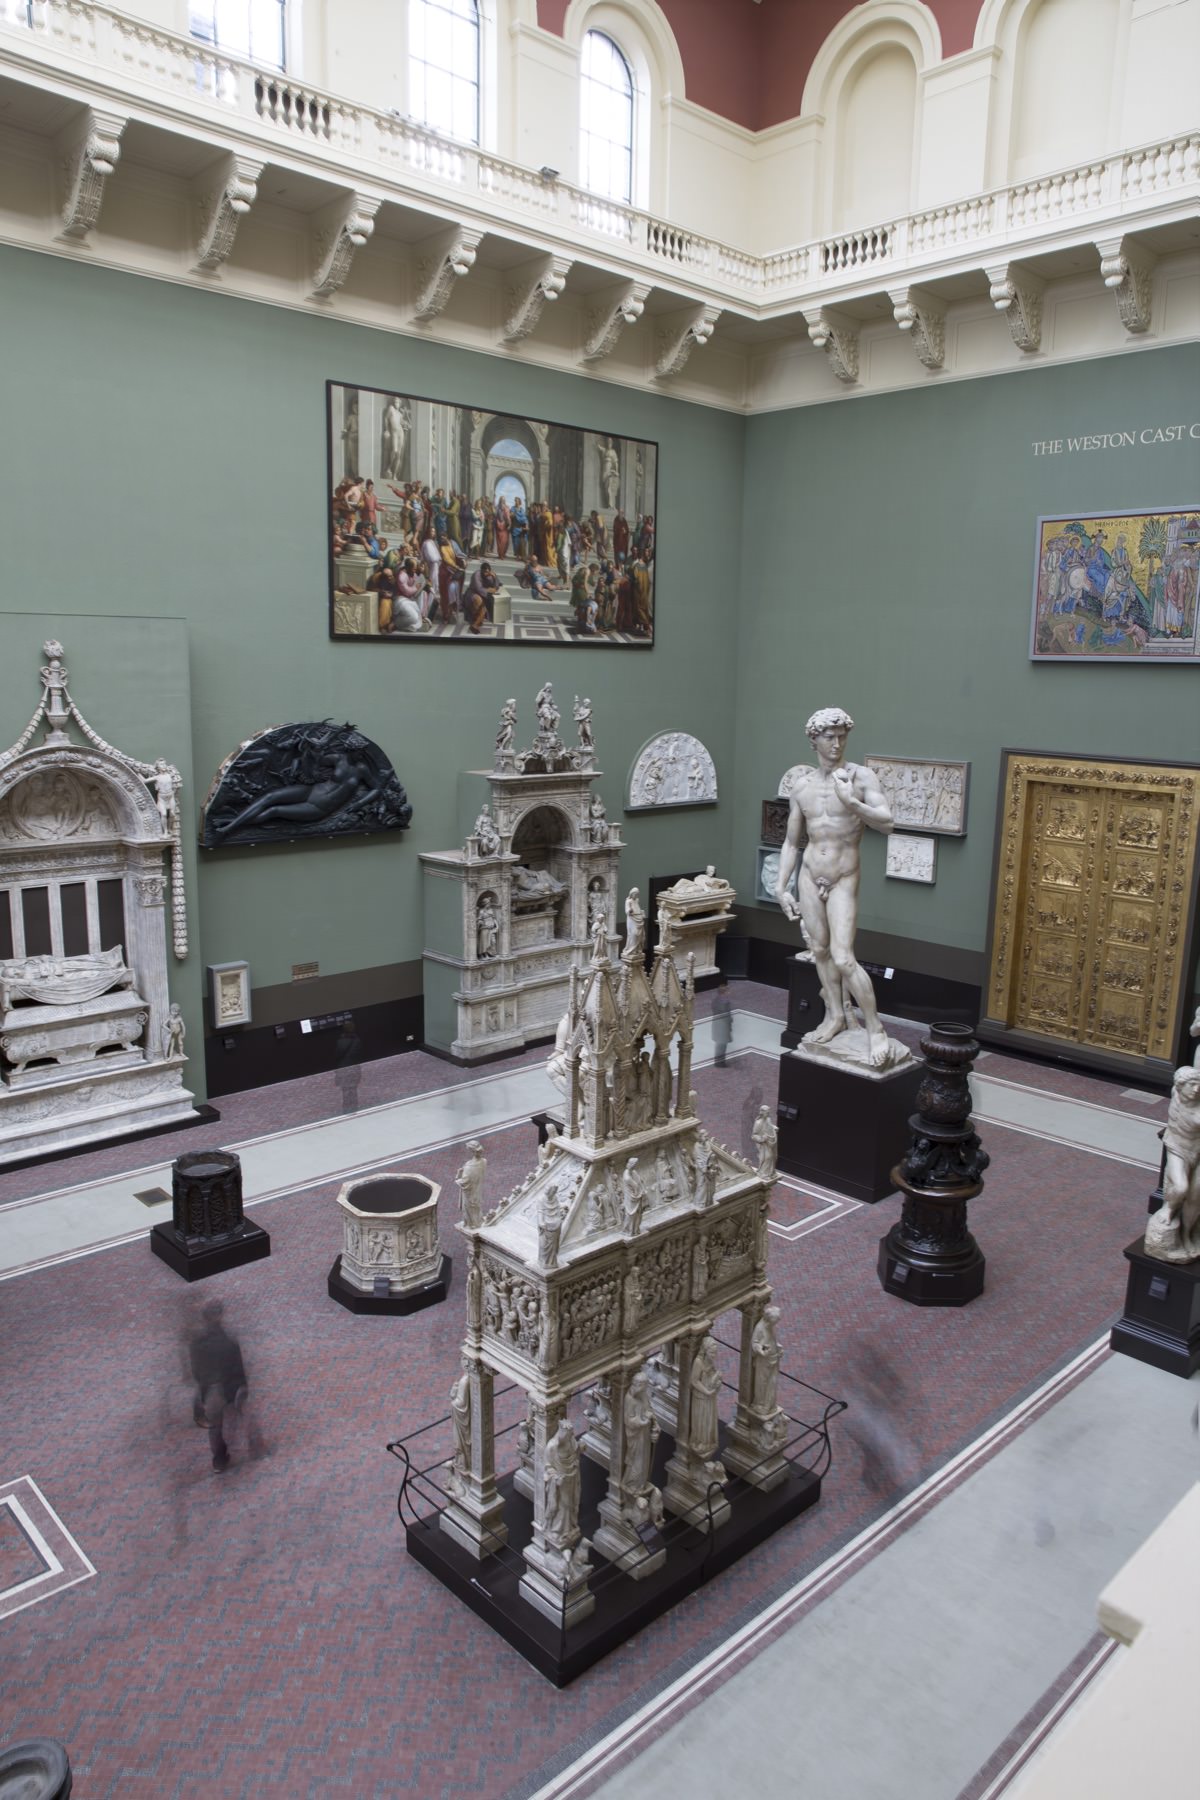 The V&A’s Cast Courts opened in 1873, featuring plaster cast copies of some of Europe’s most treasured sculptures and architectural parts. Copies were displayed as a way to bringing these treasures to the British populace, where bringing the original was impossible. (Photograph © Victoria and Albert Museum)